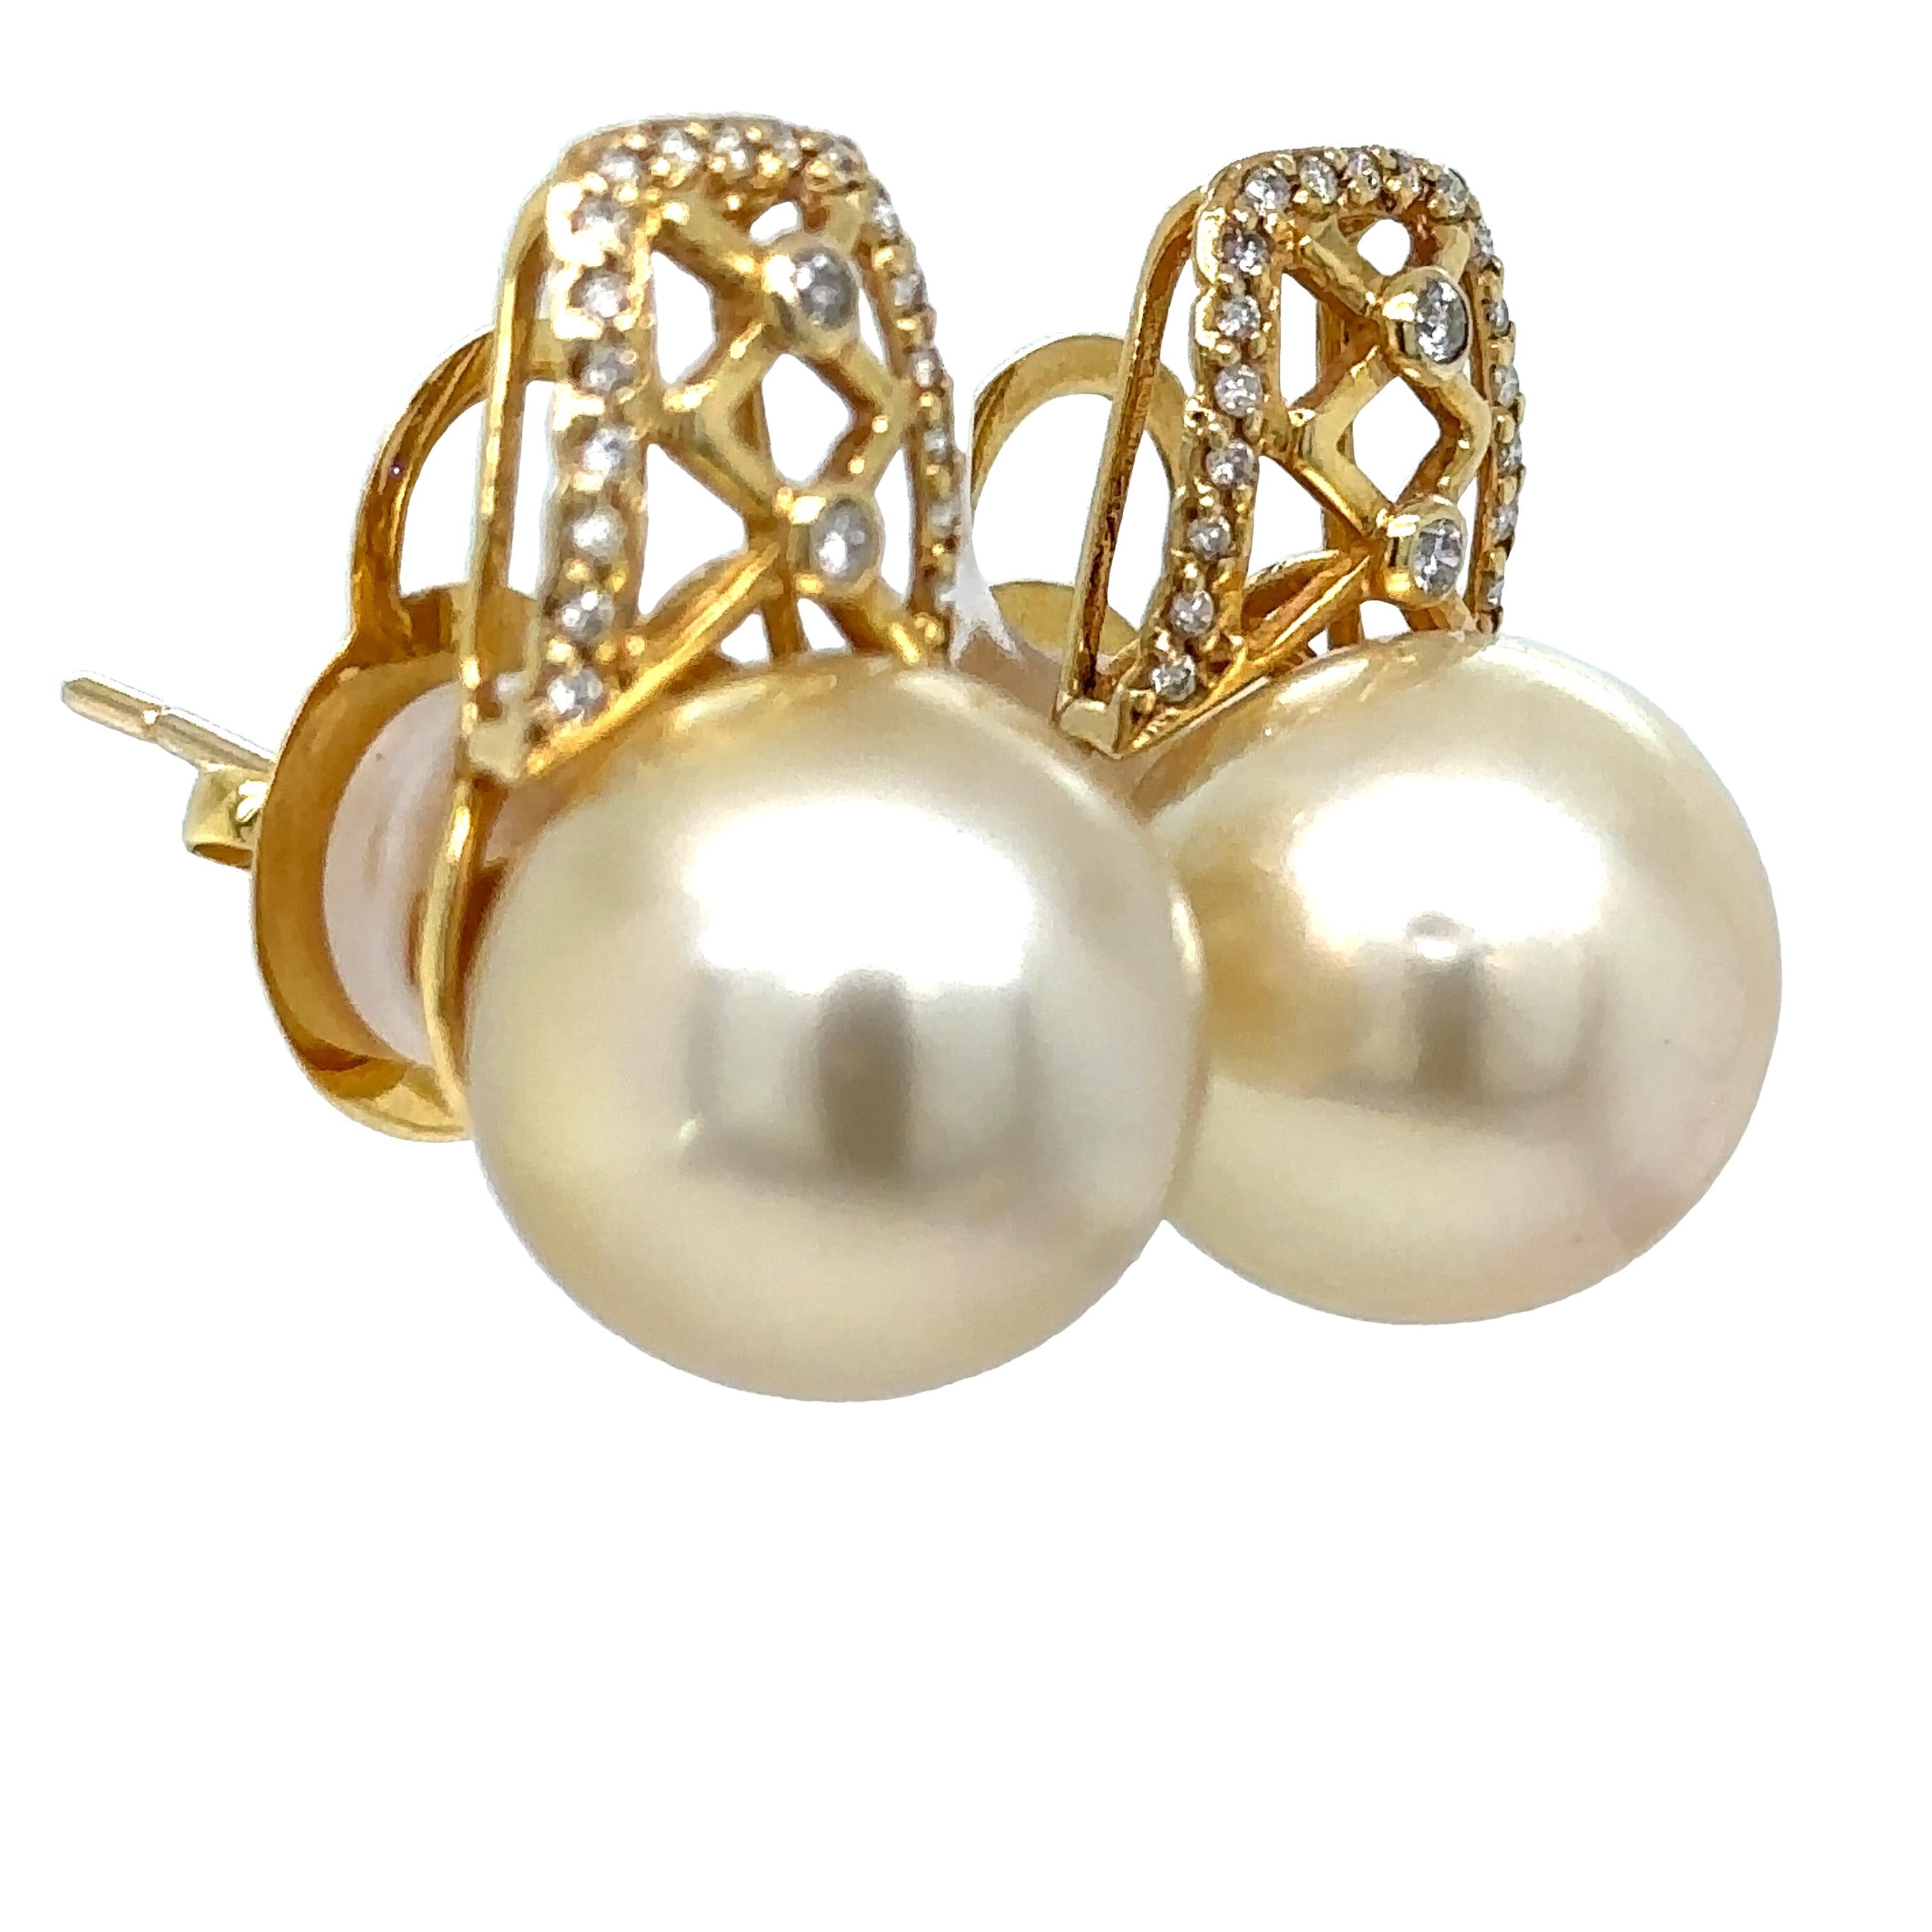 A Pair Of Pearl And Diamond Stud Earrings. Each earring with a 14.5-15.0mm South Sea cultured pearl and 21 round brilliant cut diamonds are set in 18ct yellow gold.

Pearl size: 14.6 - 15.0mm, Shape: Semi-round, Colour: Champagne, Lustre: Medium,